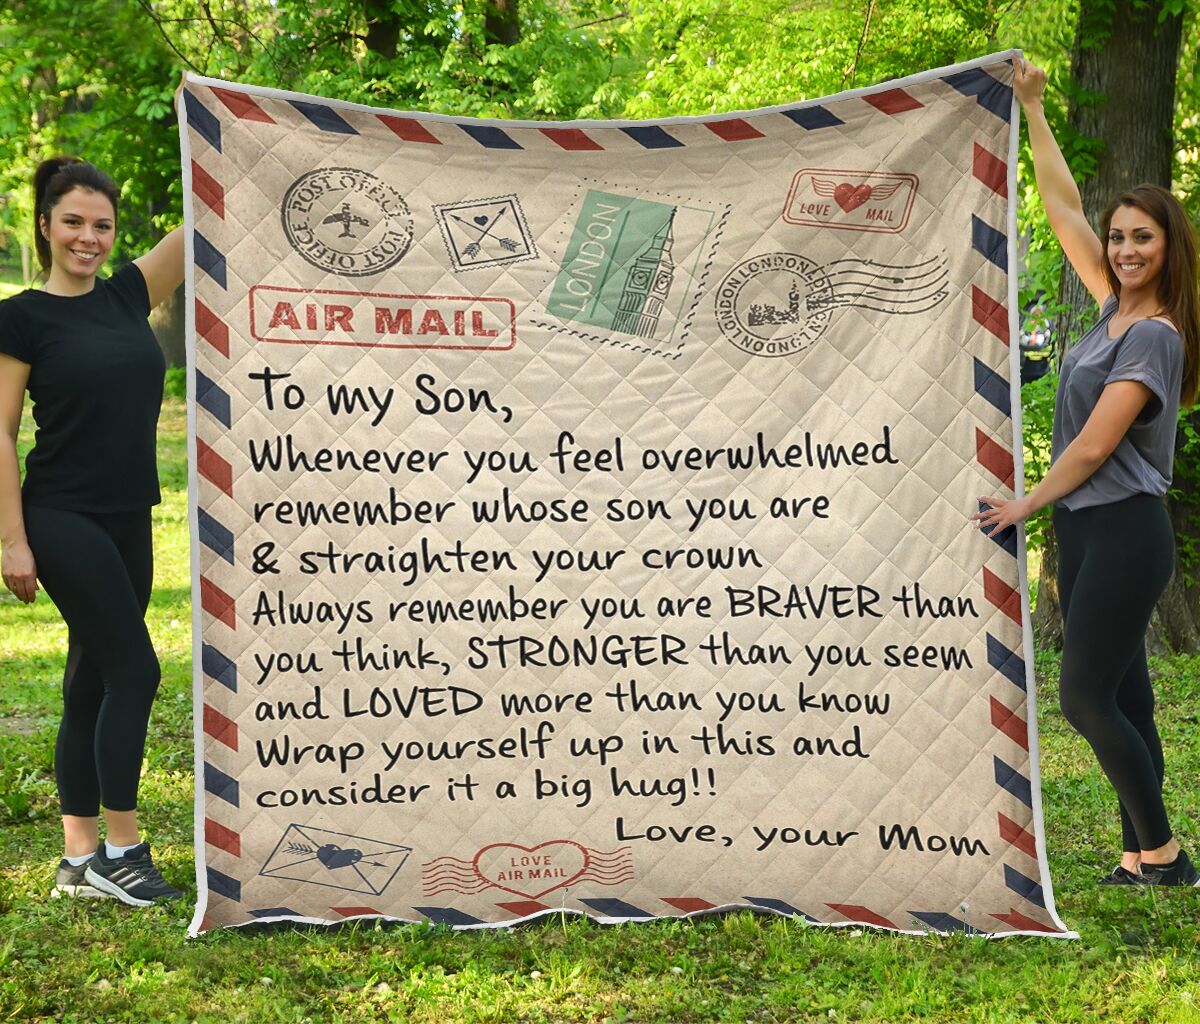 Letter air mail to my son mom quilt blanket